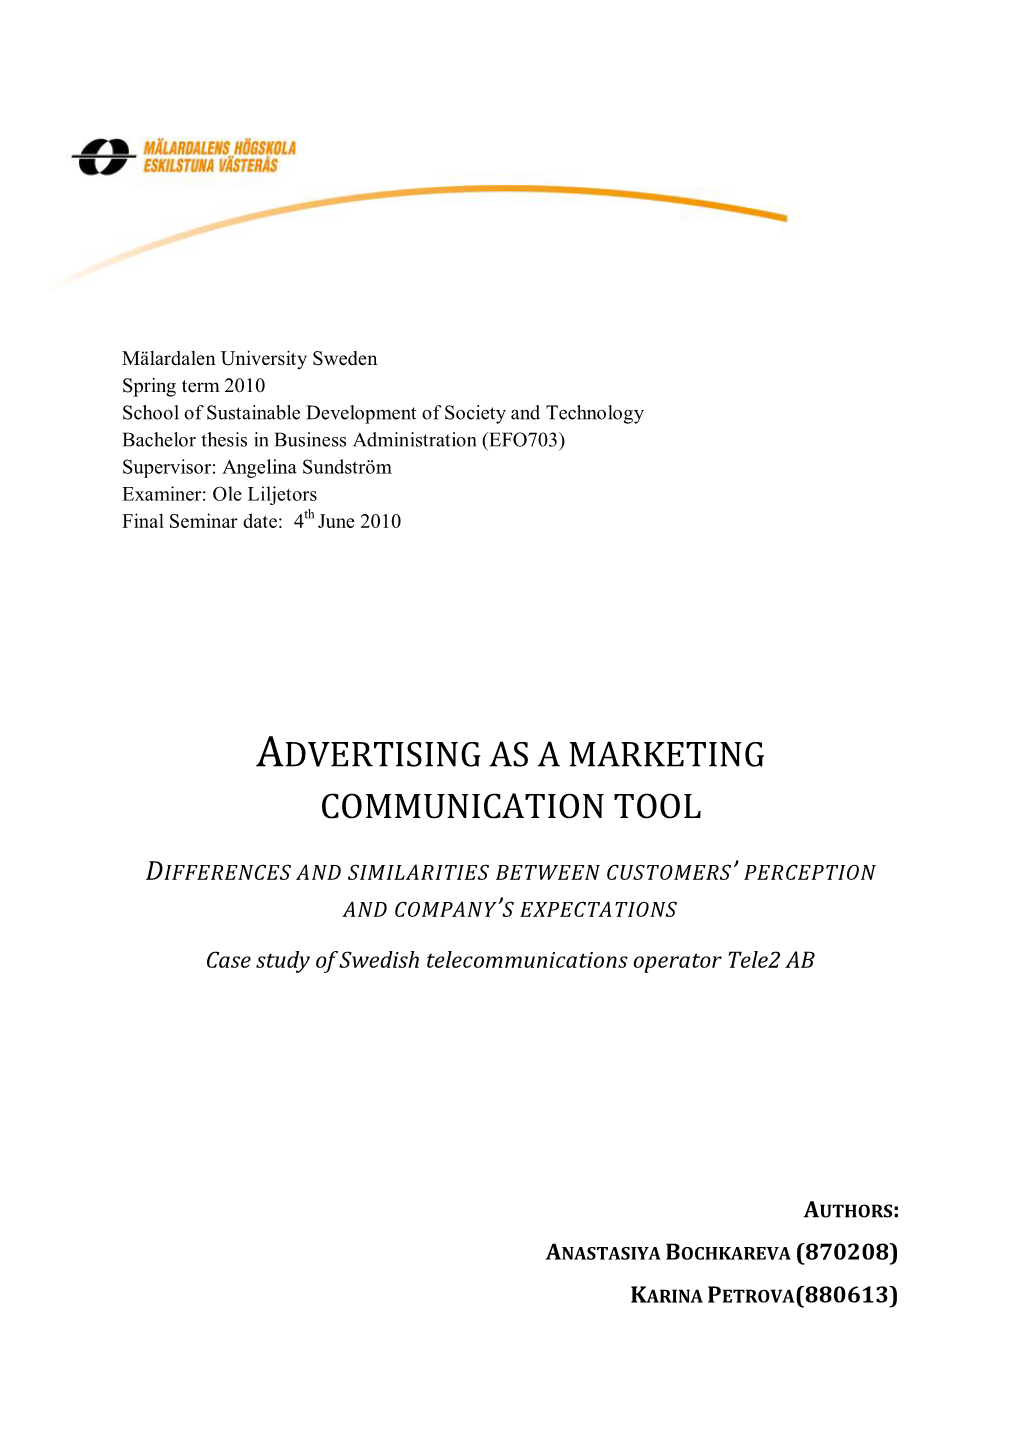 Advertising As a Marketing Communication Tool